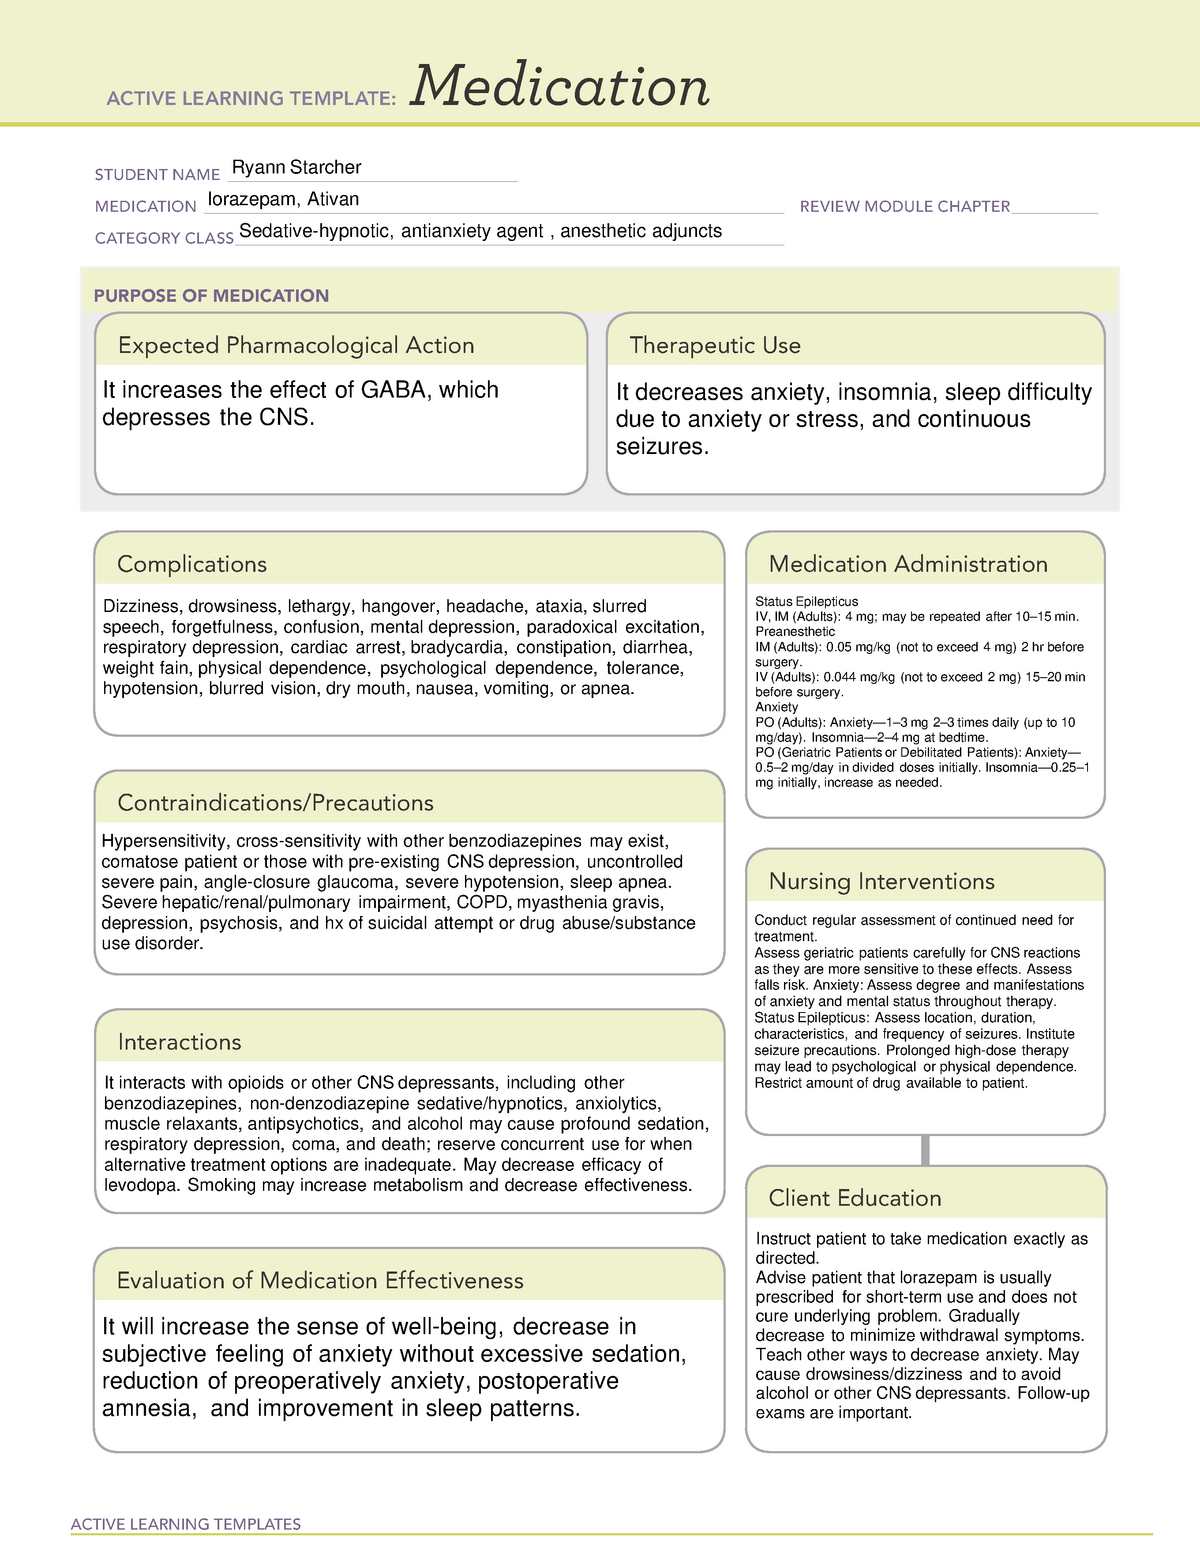 lorazepam-medication-template-for-nclex-based-medication-active